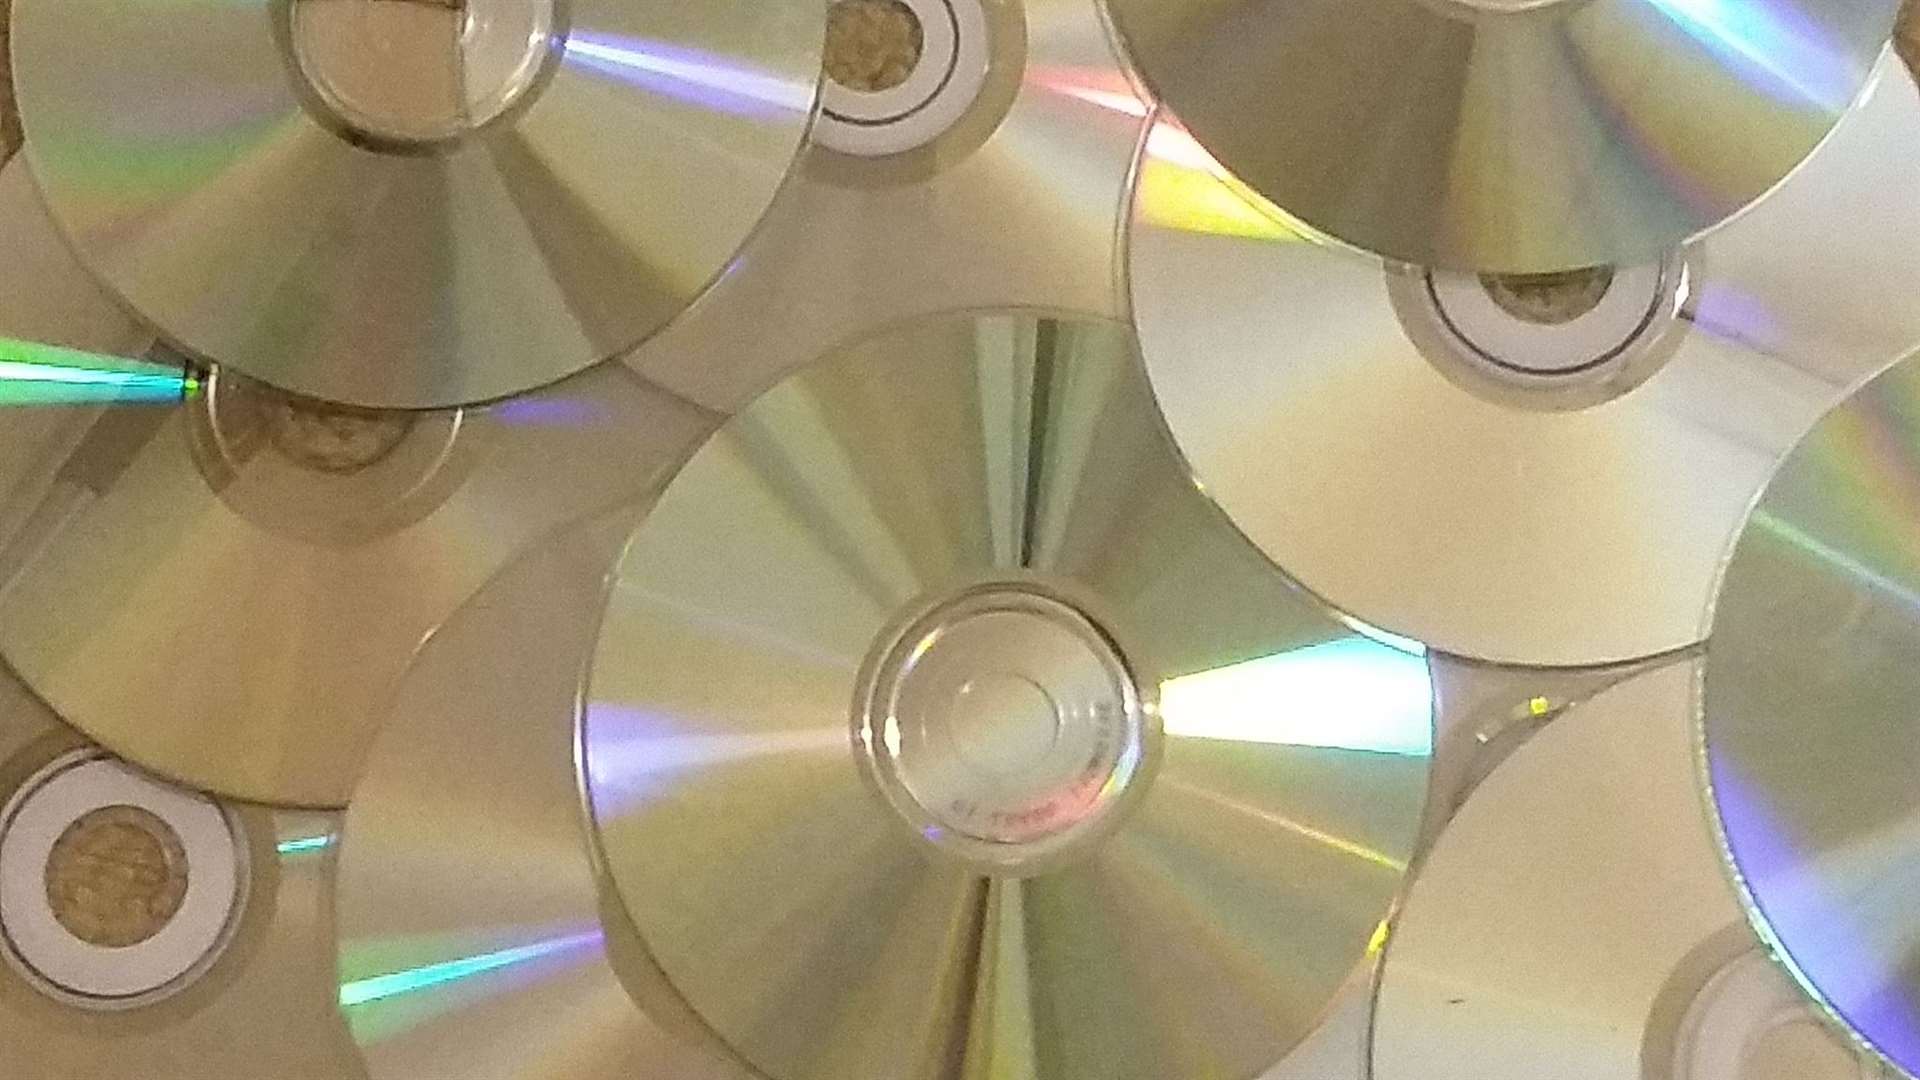 The future of CDs...